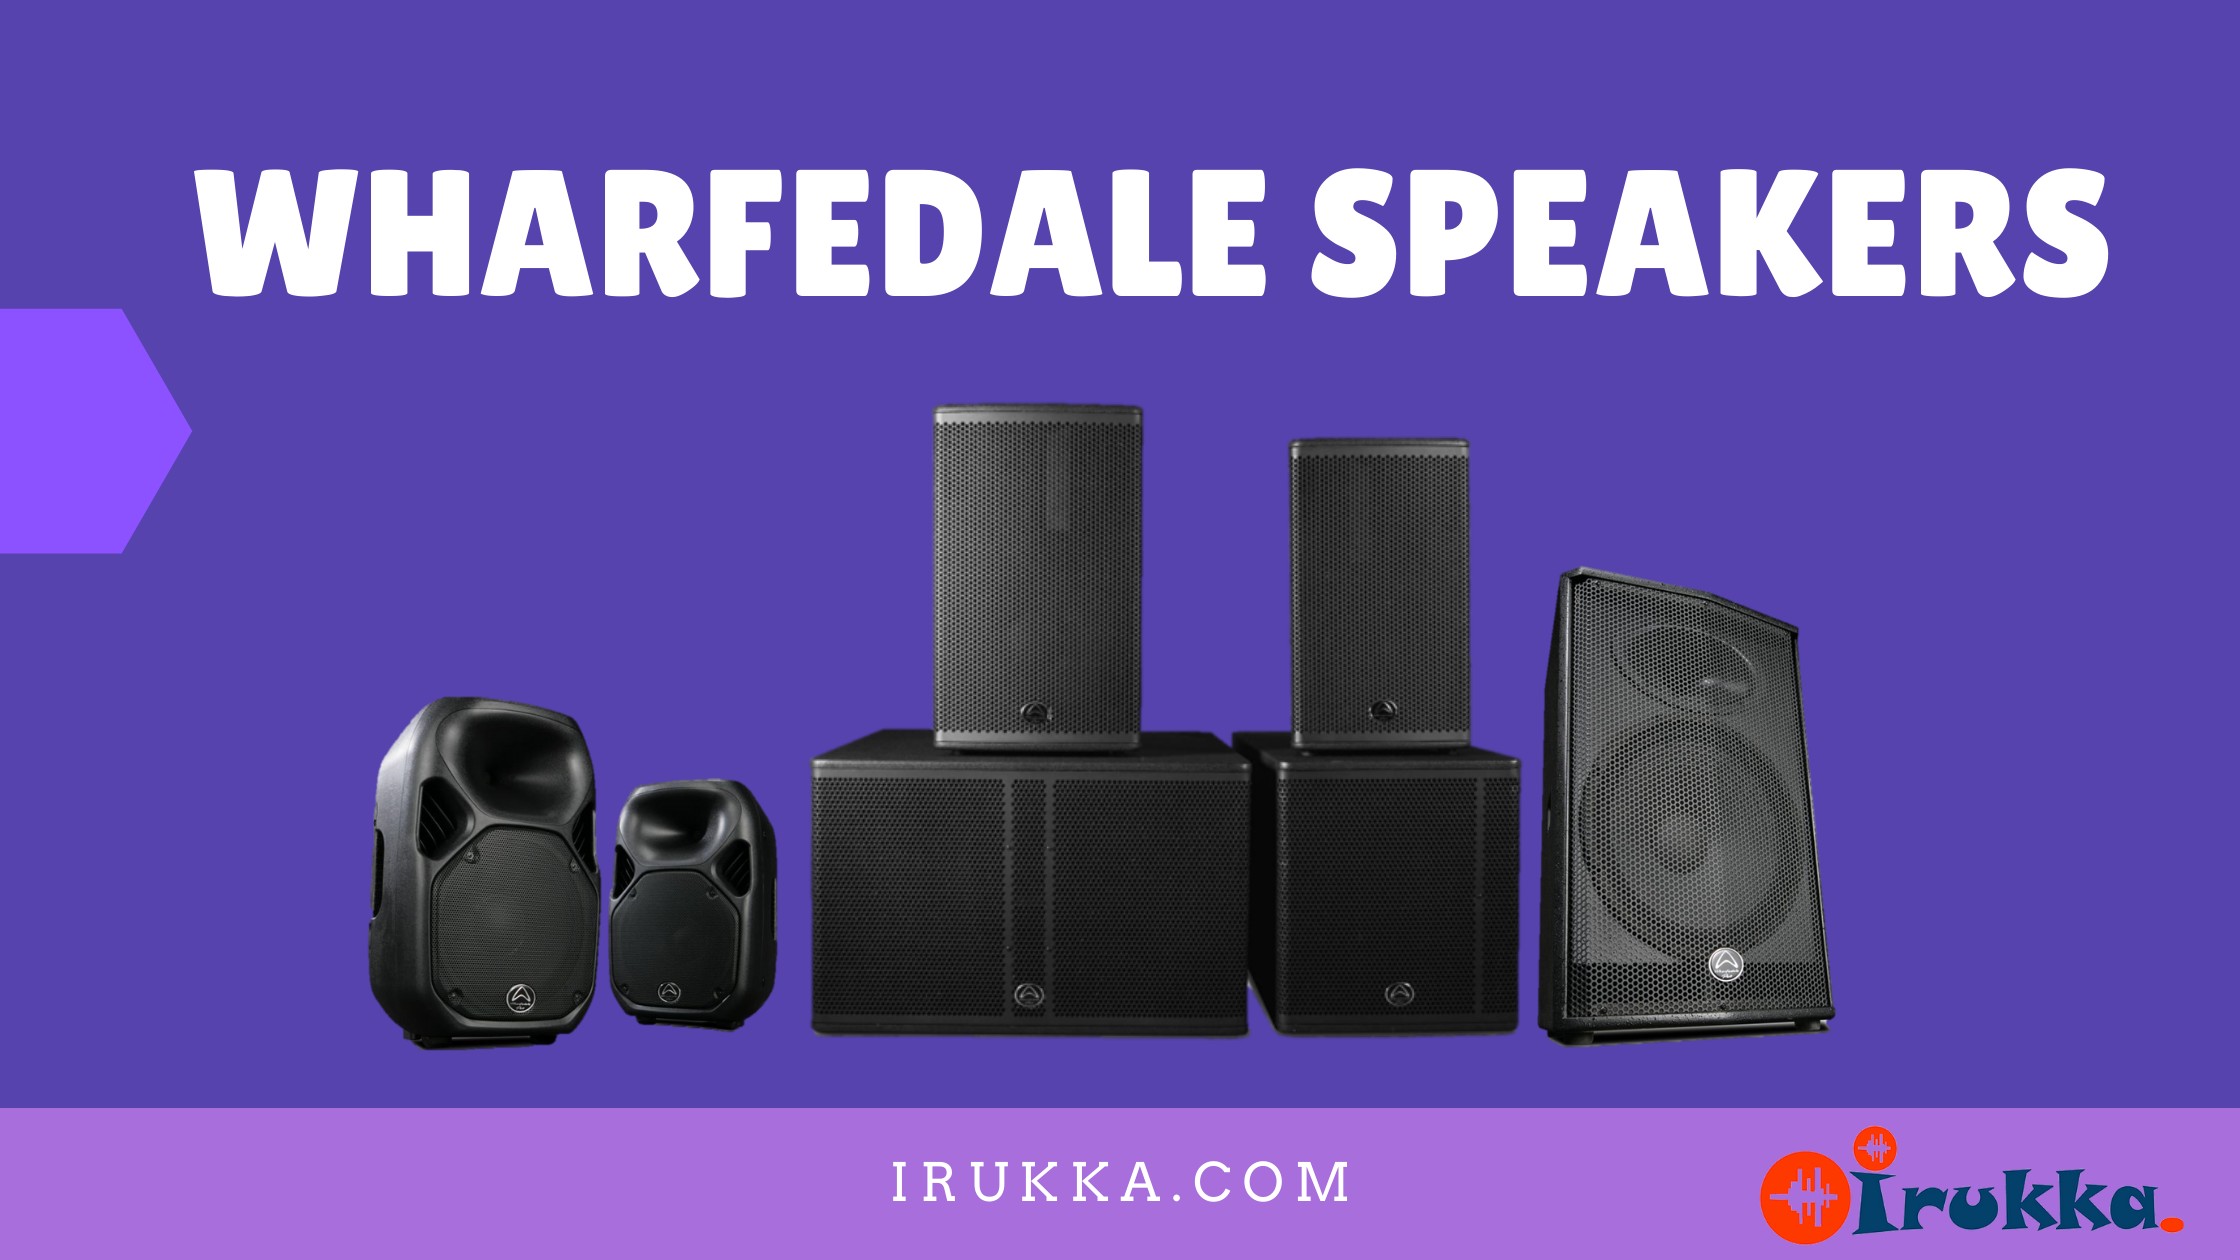 Impact 215LL- WHARFEDALE NIGERIA❤❤ BEST PLACE TO BUY SPEAKERS IN NIGERIA ❤ WHARFEDALE SPEAKERS IN NIGERIA FOR SALE ONLINE❤ IMPACT-215LL❤